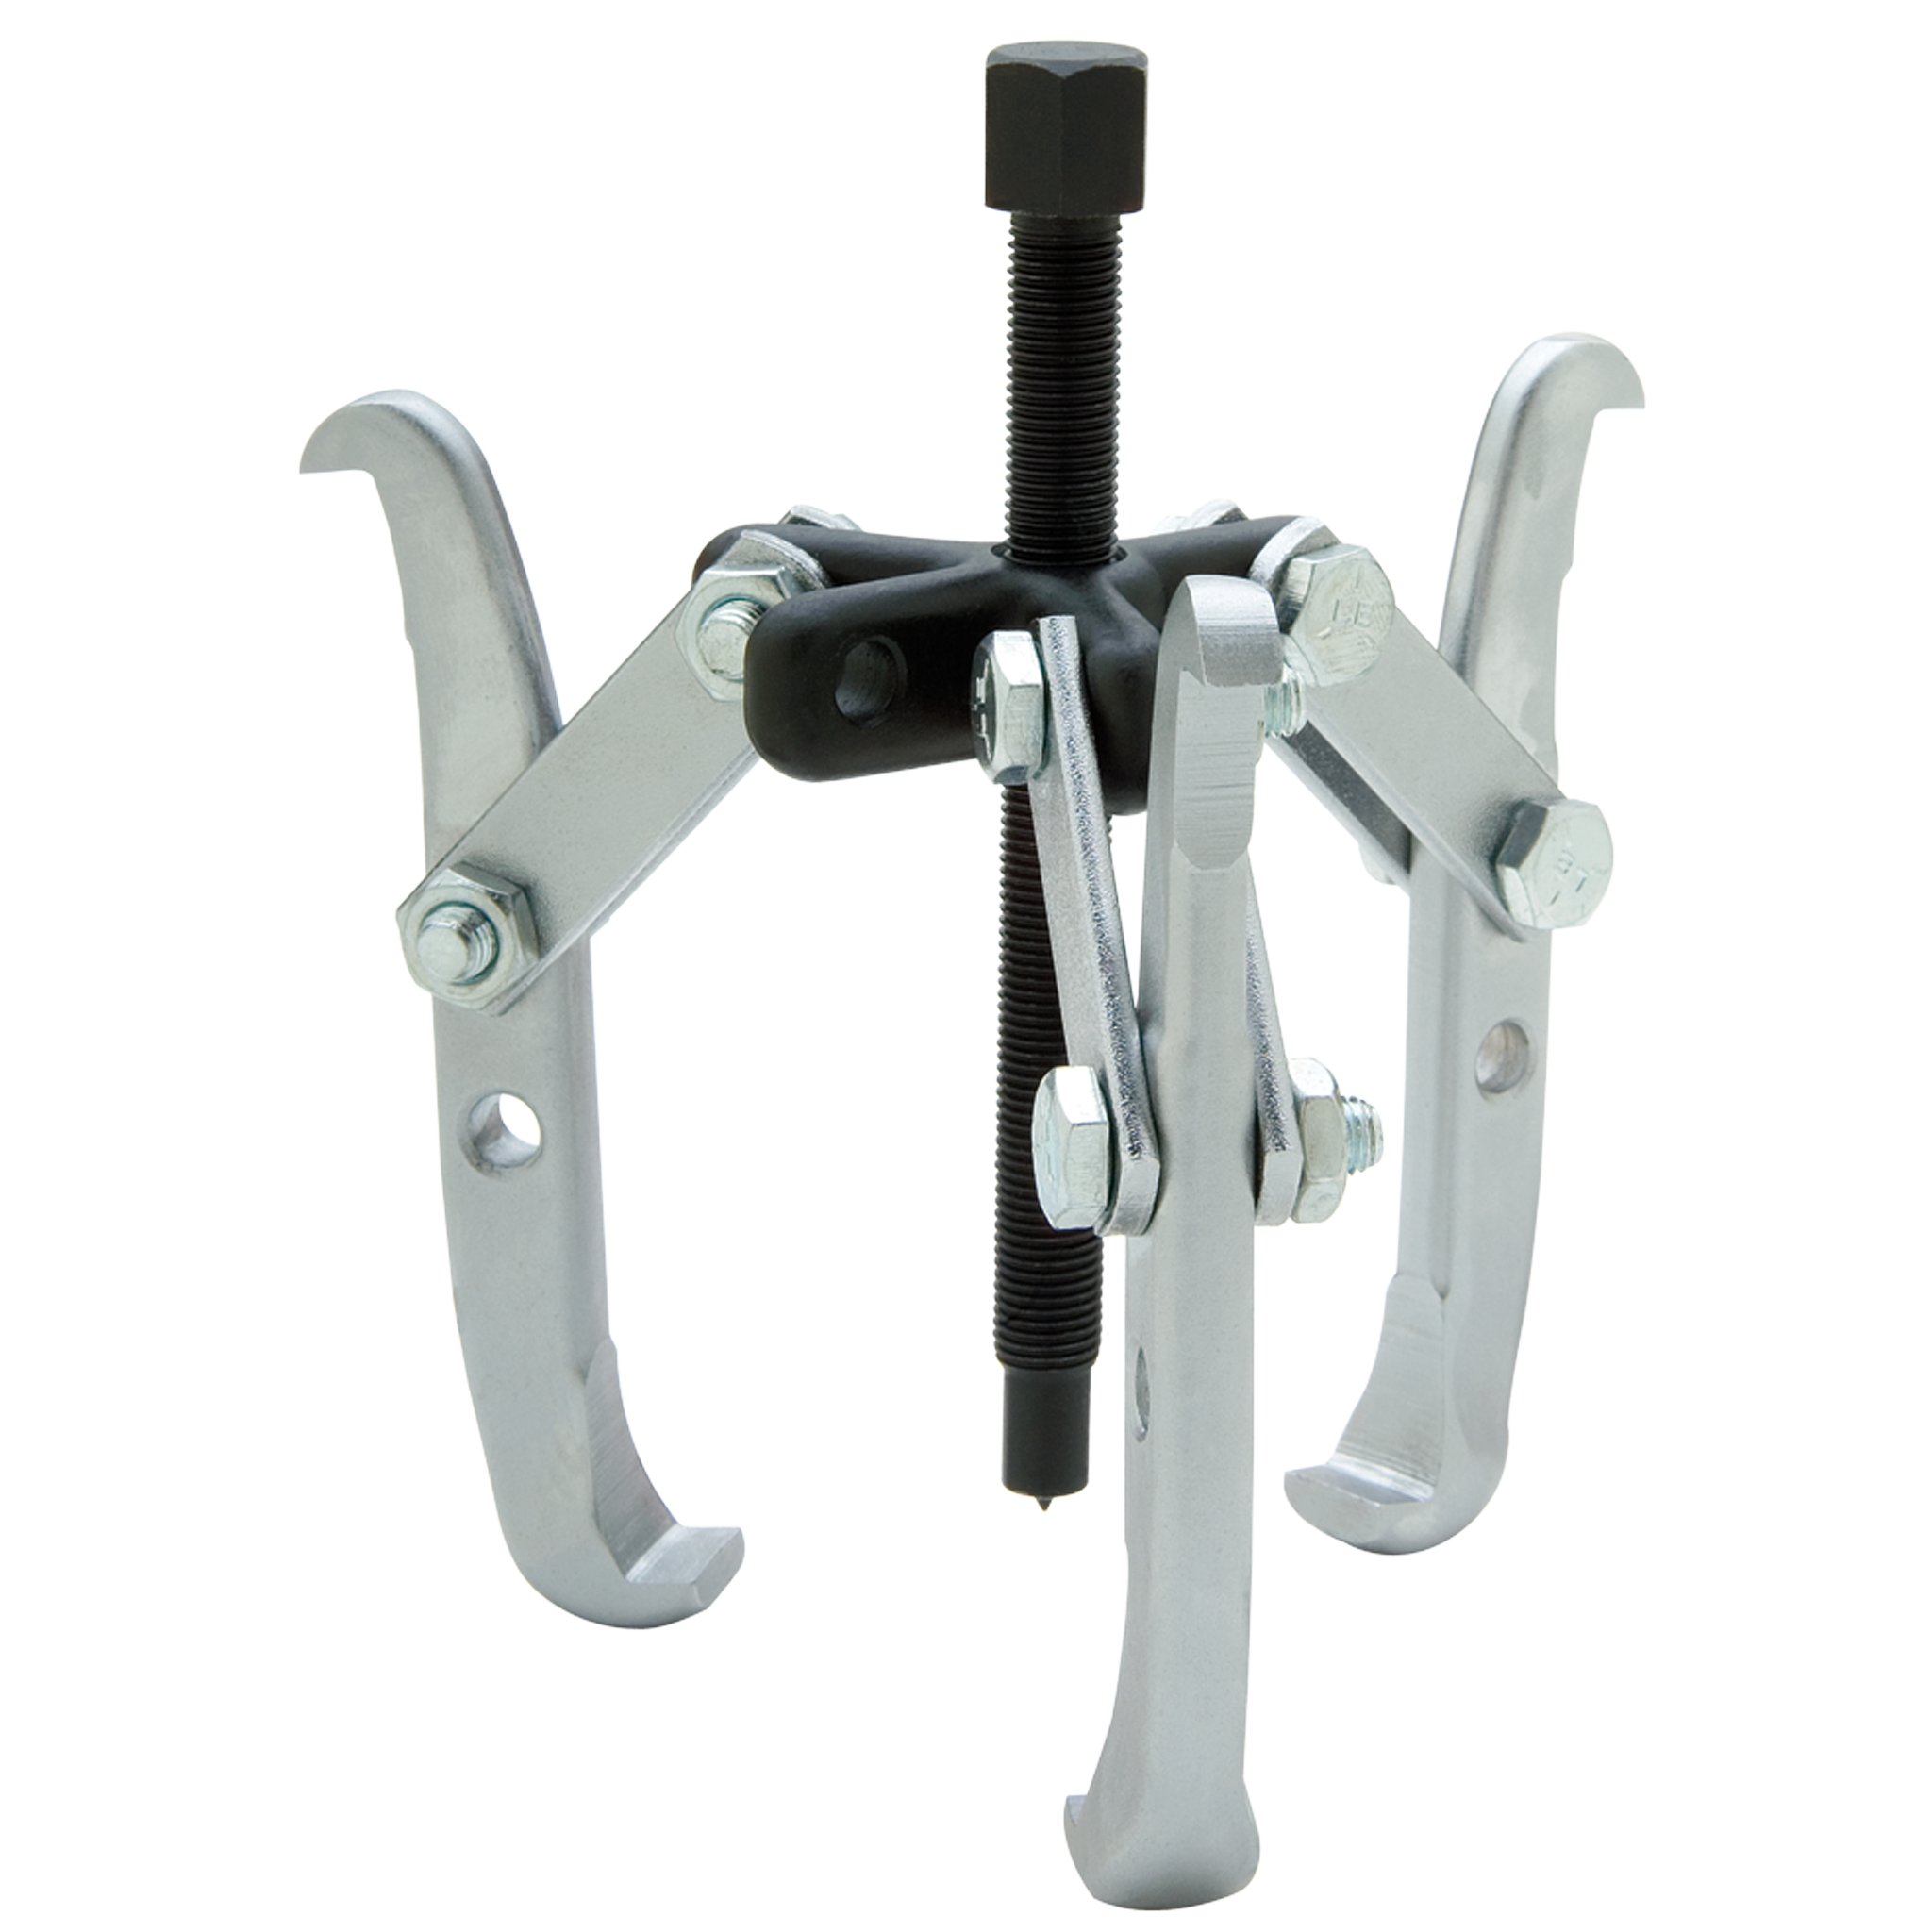 2 Ton Capacity, Adjustable & Reversible 3 Jaw Puller